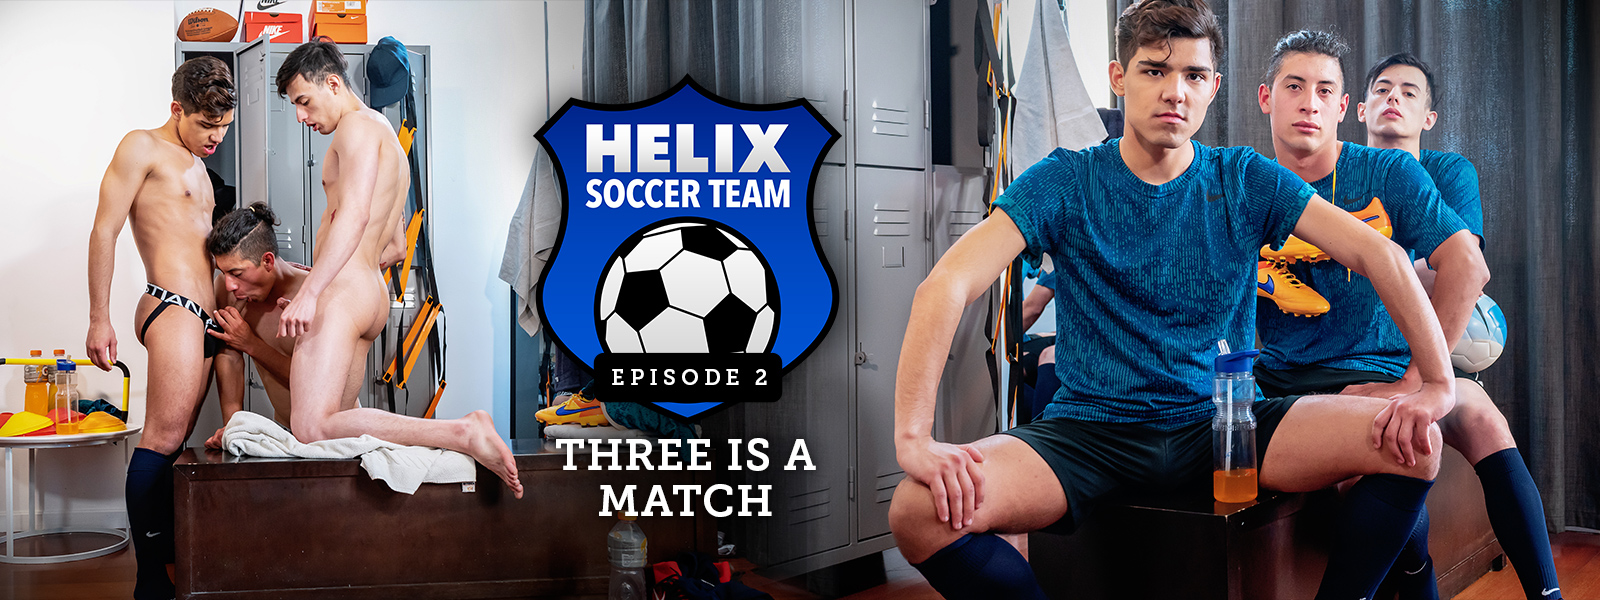 Helix Soccer Team | Ep. 2 Three Is a Match